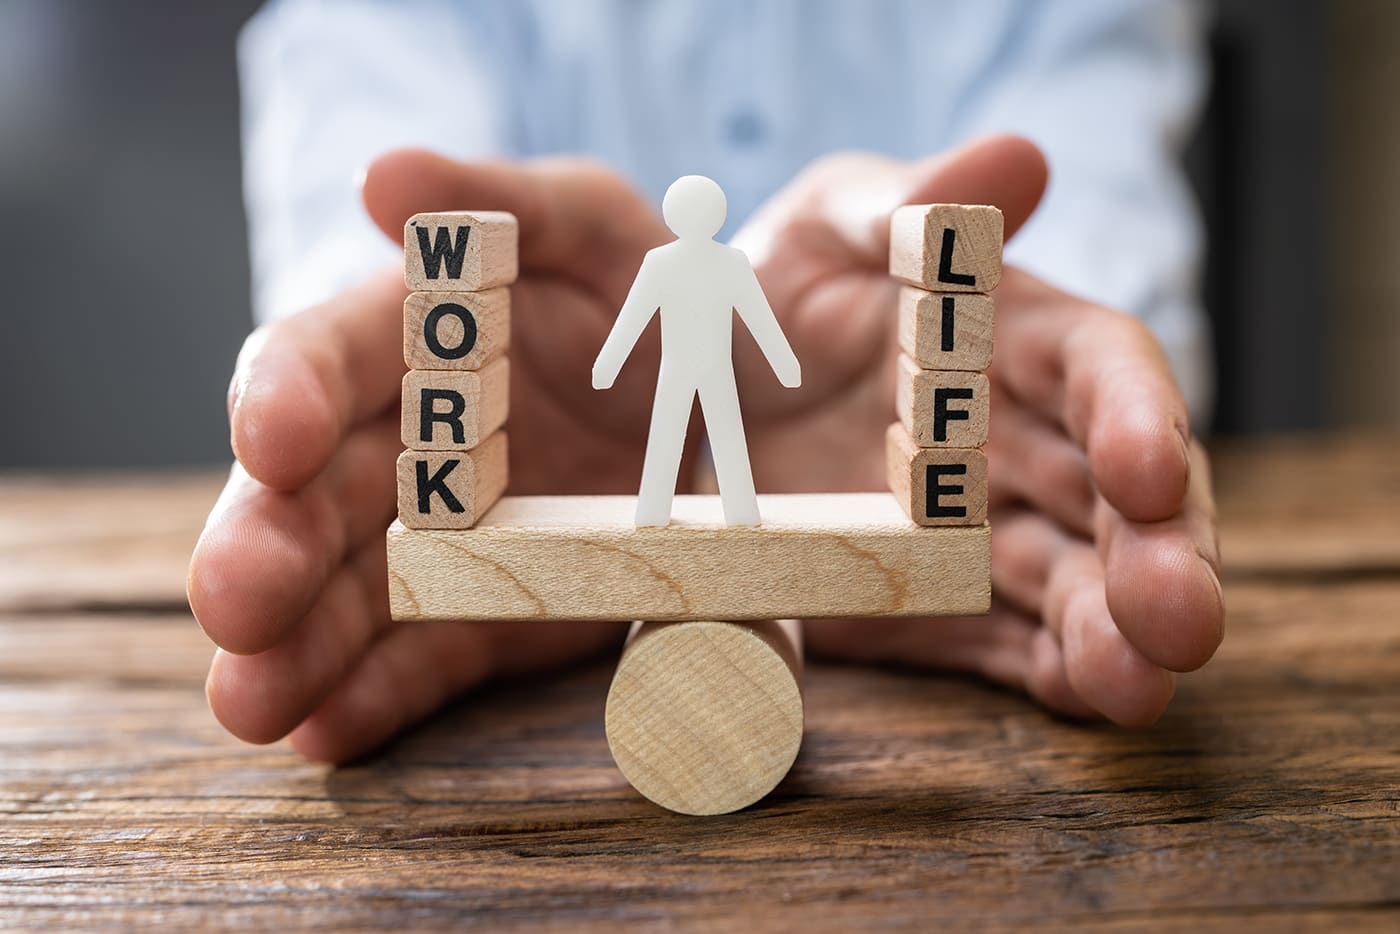 15 Habits To Achieve A Better Work-Life Balance In Today’s Fast-Paced World | Bernard Marr